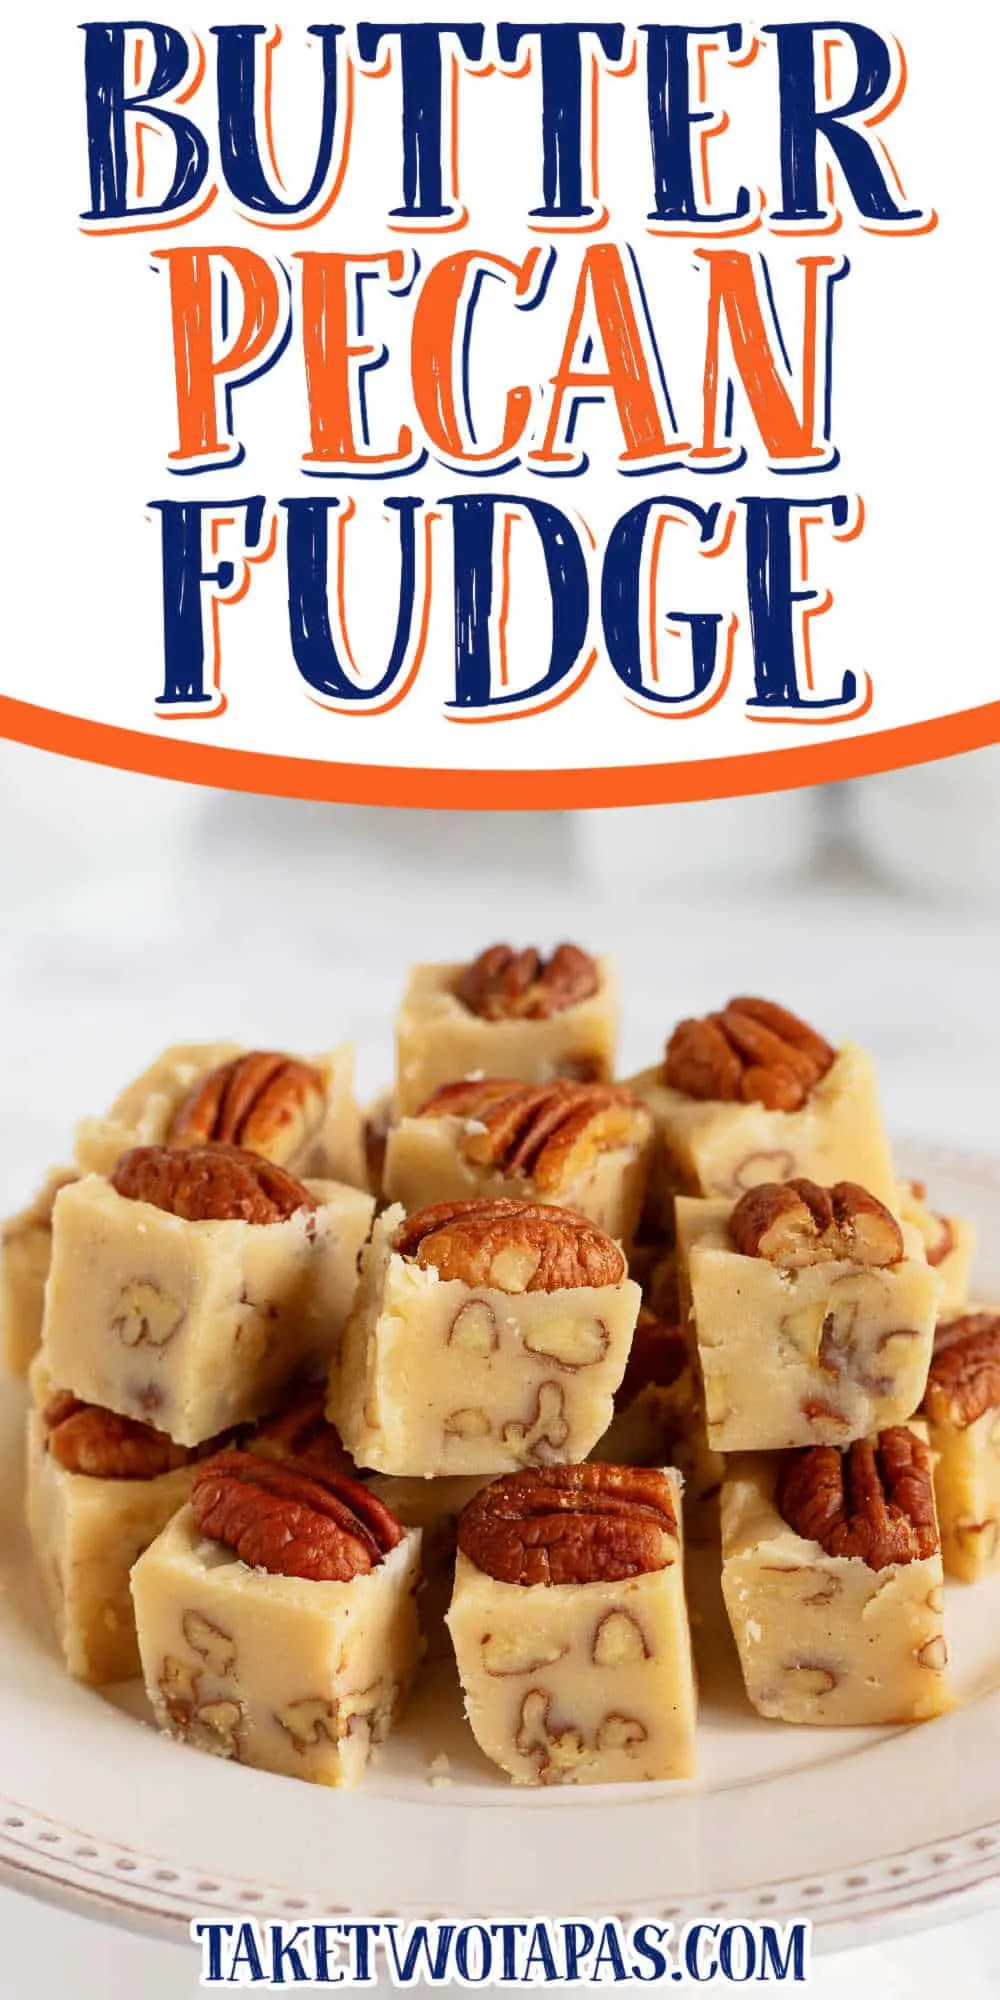 stack of fudge with text "butter pecan"